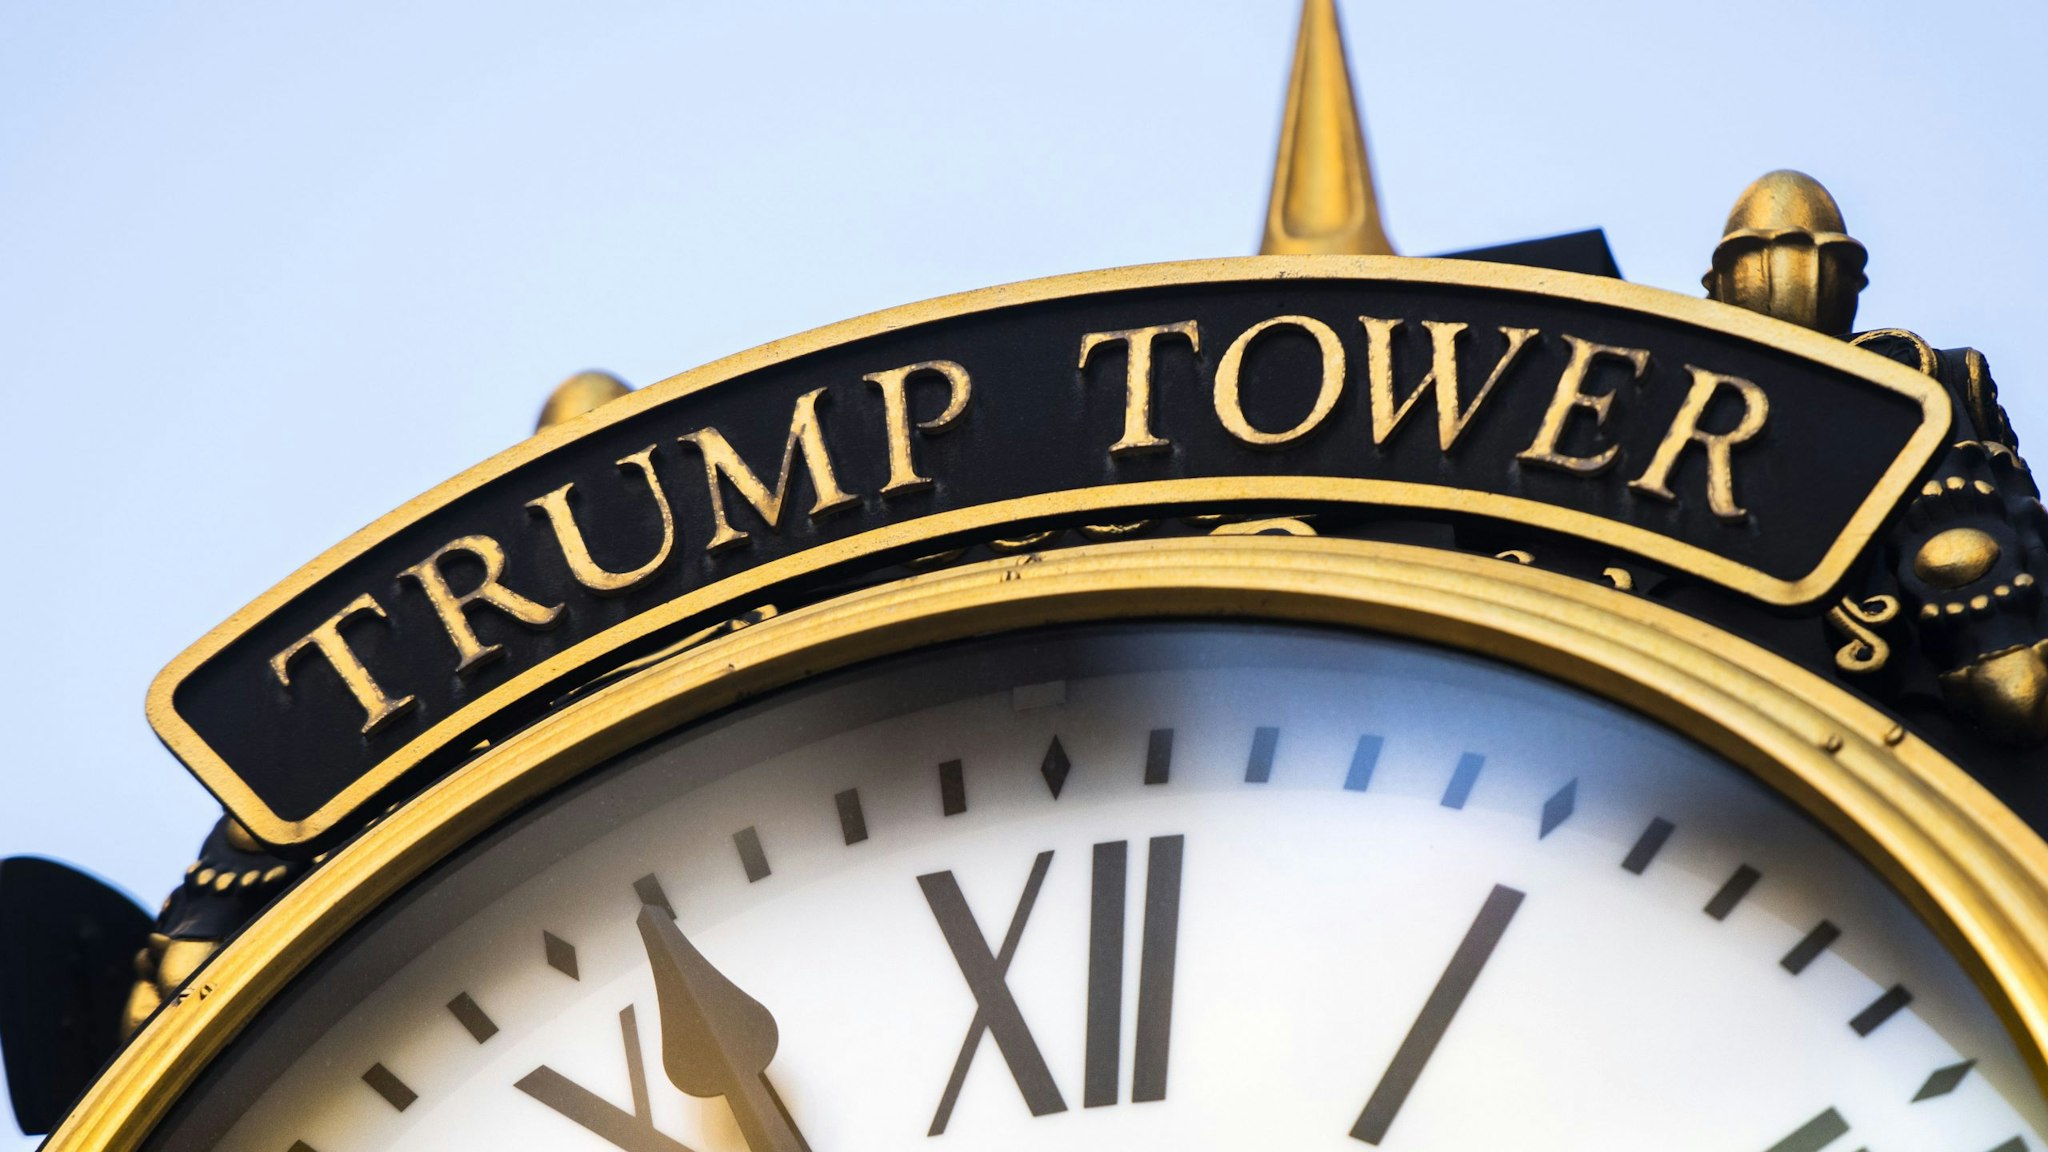 A clock outside of Trump Tower in New York, U.S., on Sunday, Jan. 24, 2021. Donald Trump's name is emblazoned on buildings across Manhattan, usually spelled out in large gold lettering. Now, some unit owners fear that having his name on their building could harm the value of their investment.